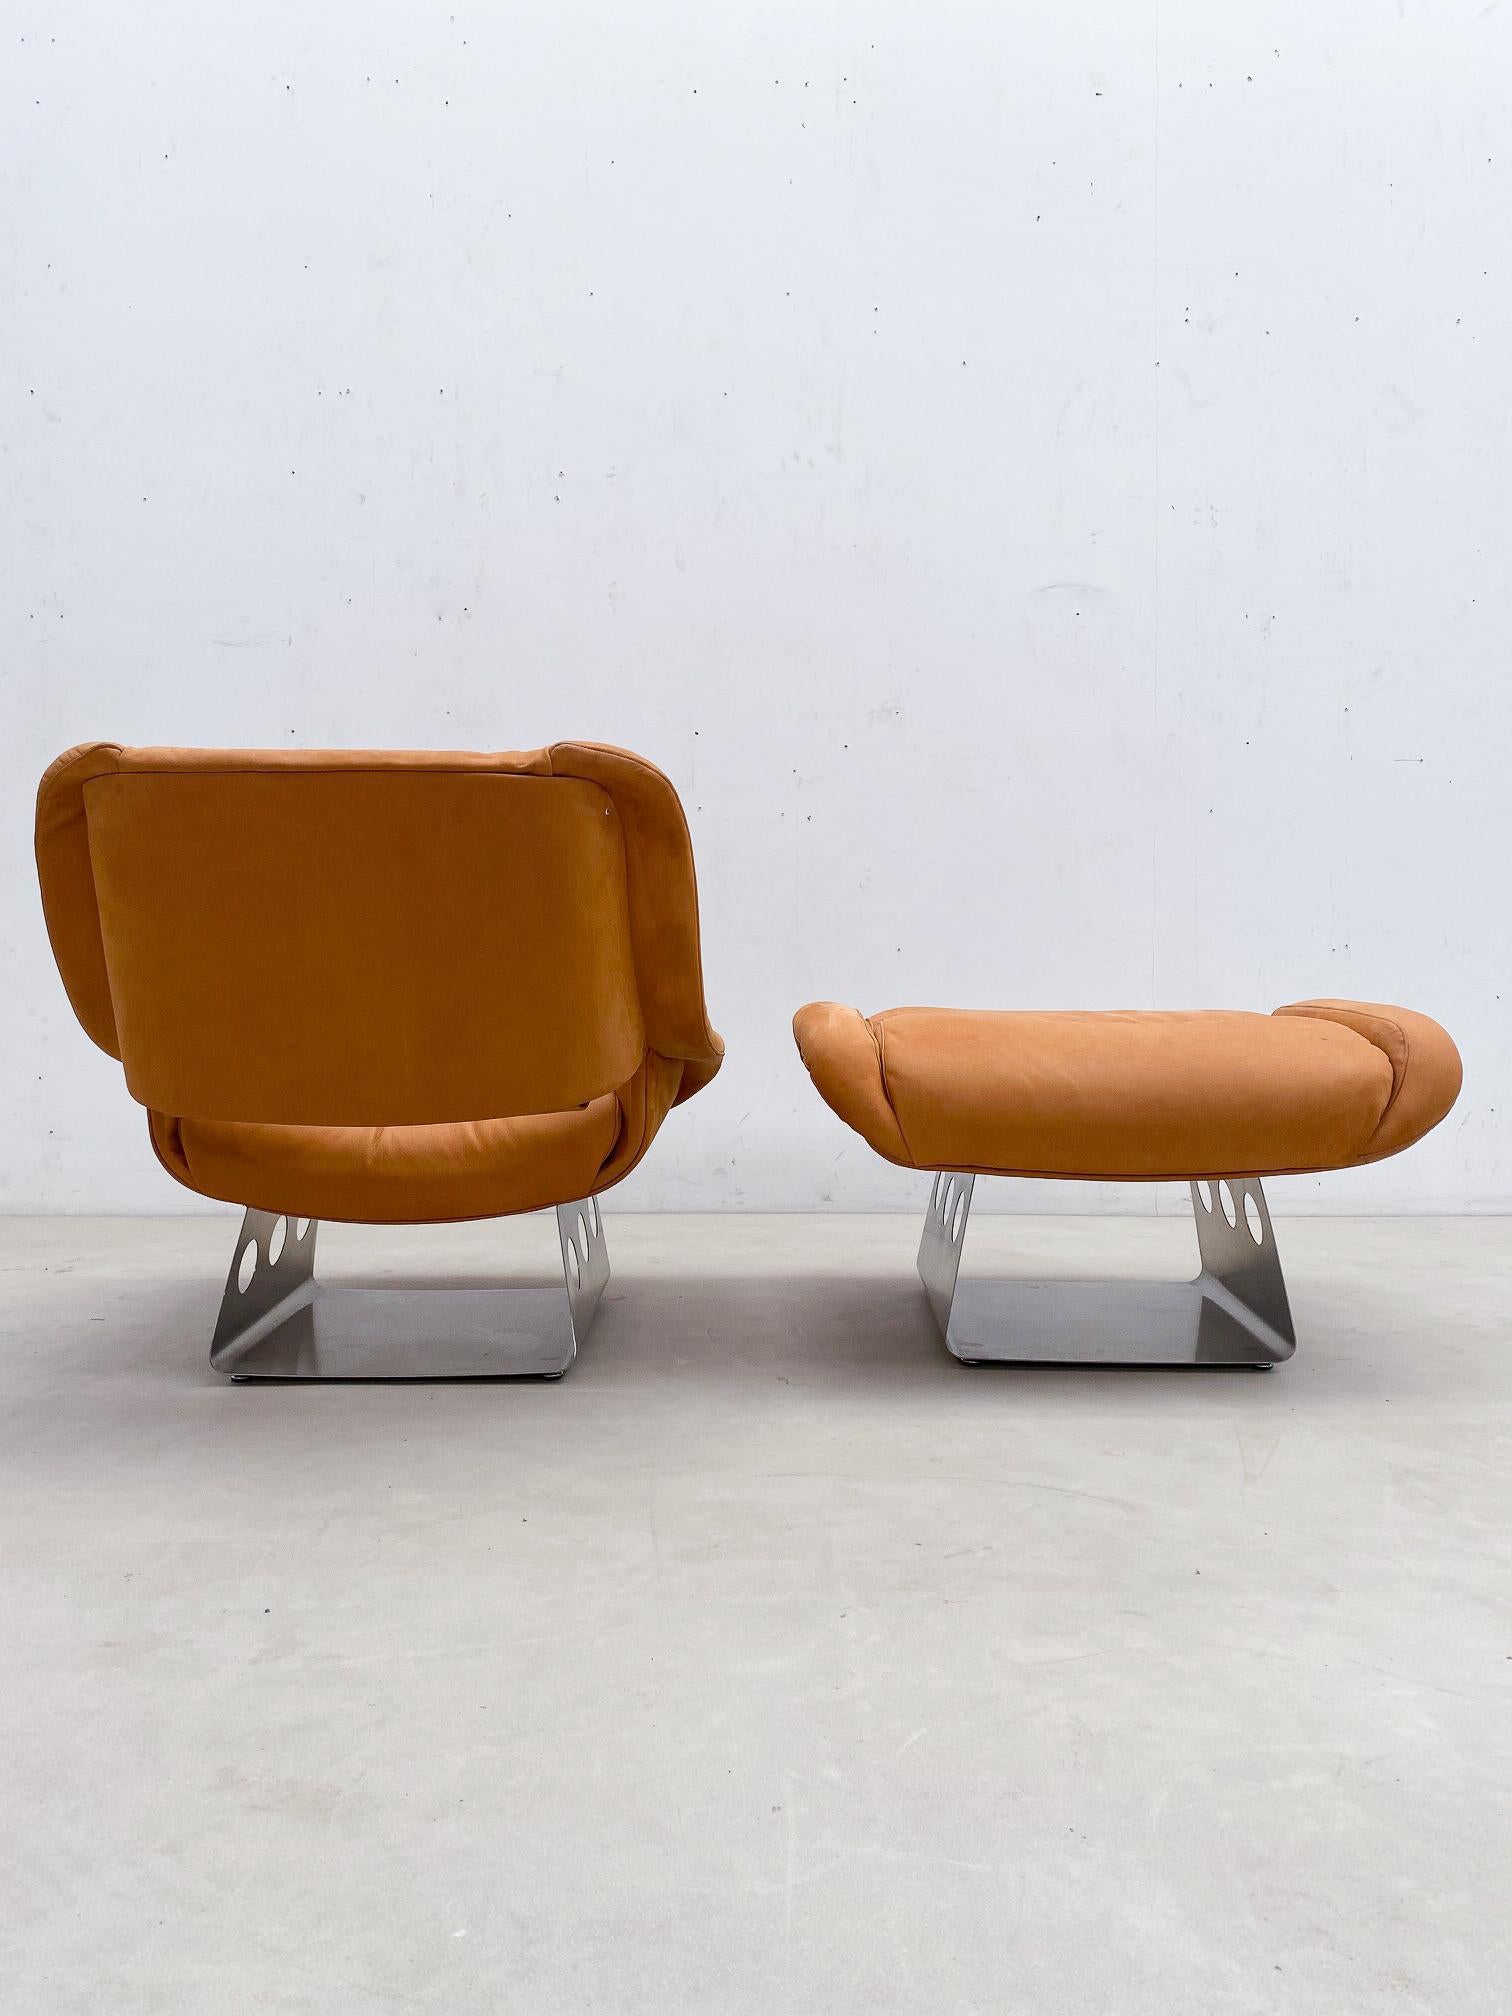 Mid-Century Modern Lounge chair and Ottoman, Italy, 1970s - New Leather Upholstery.